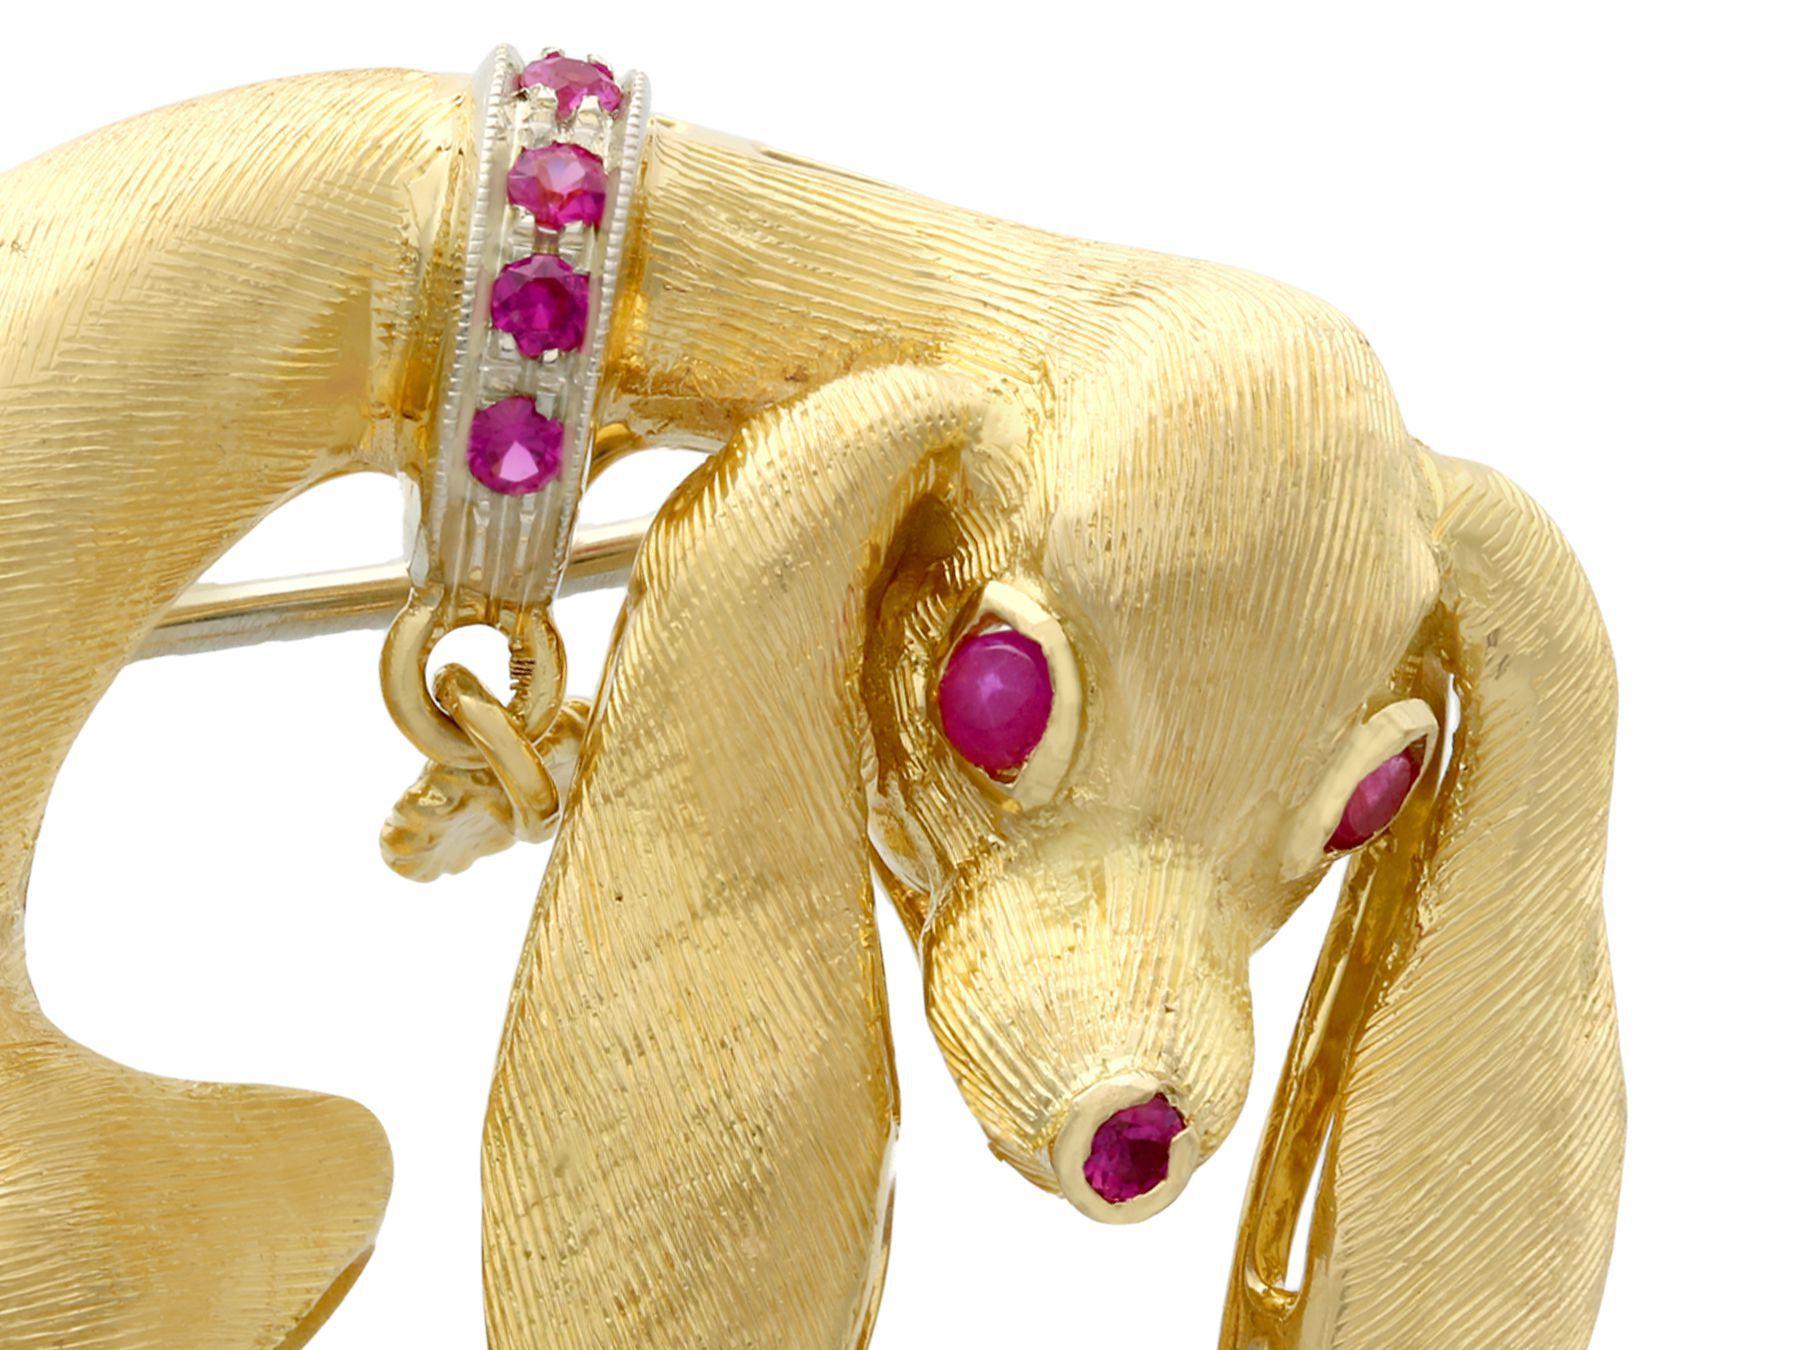 A stunning 0.30 carat ruby and 18 karat yellow gold, 18 karat white gold set Dachshund dog brooch; part of our diverse vintage jewellery collections.

This stunning, fine and impressive vintage gold and ruby dog brooch has been crafted in 18k yellow